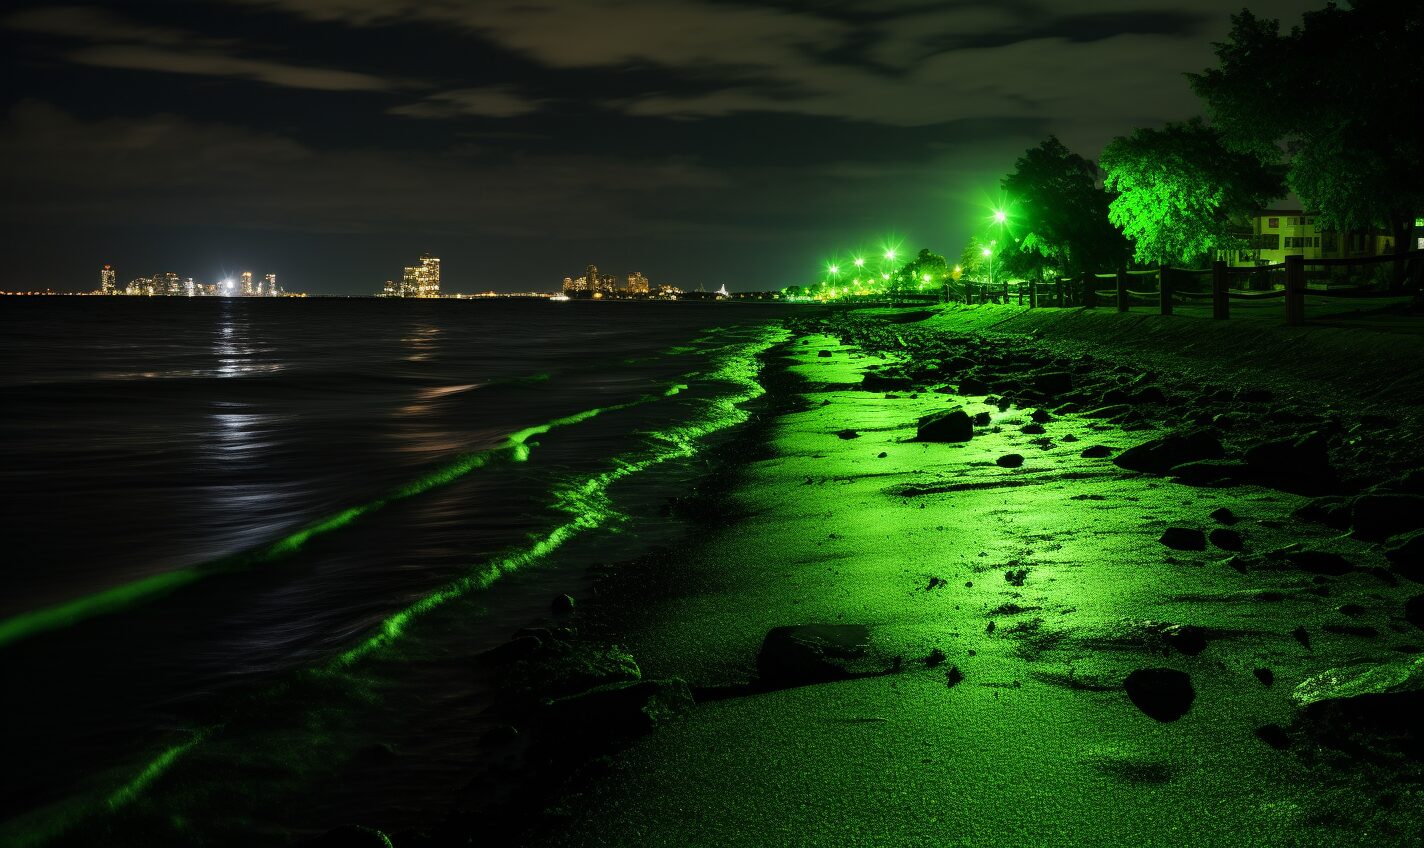 dix hills, new york in a black and neon green glow